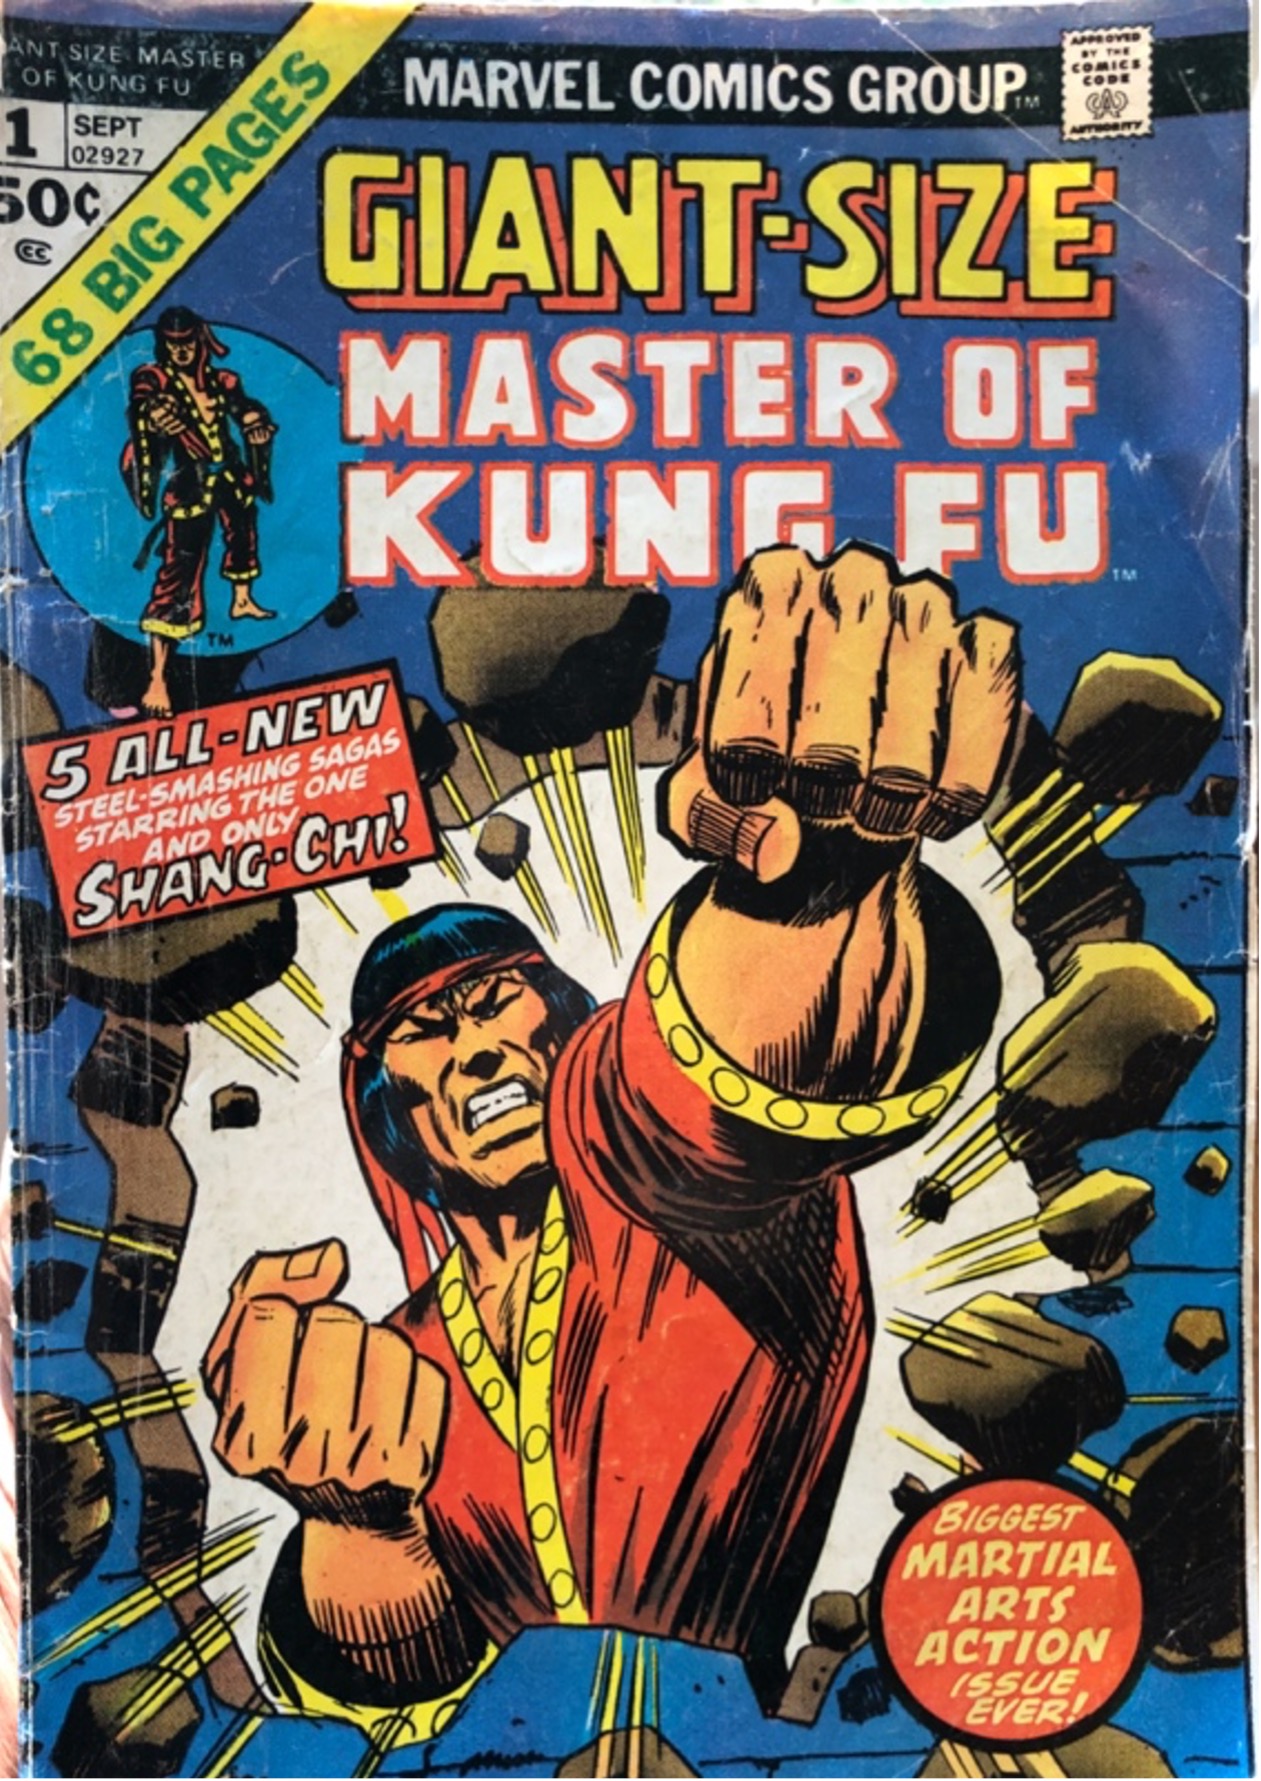 Photo of a comic cover that says "Master of Kung Fu"